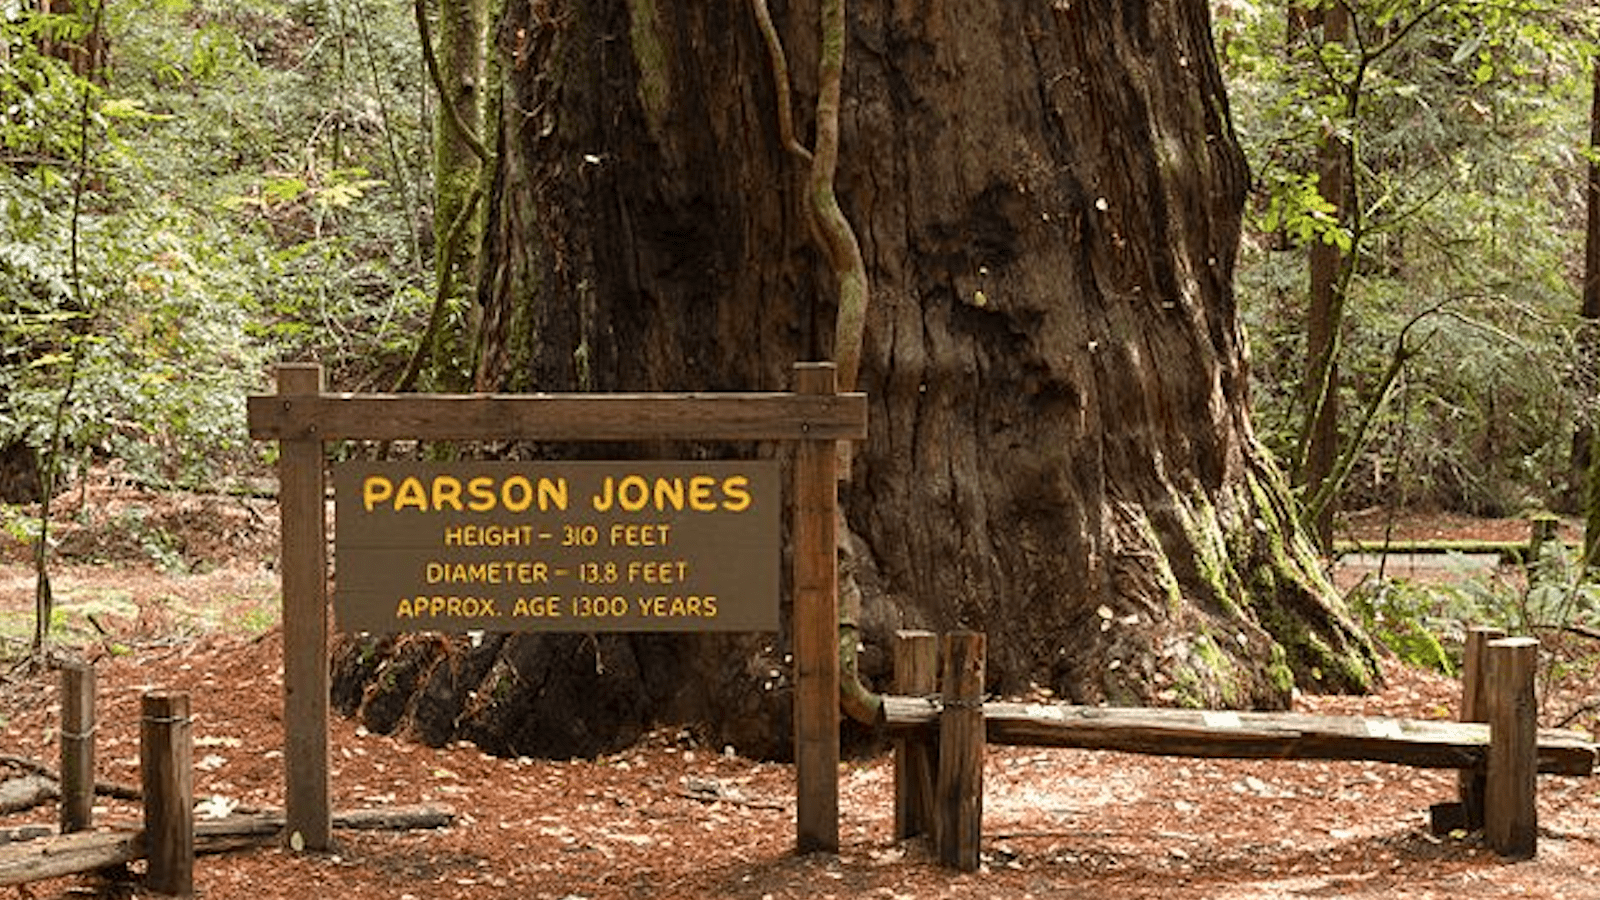 Armstrong_Redwoods_State_Natural_Reserve_wine country summer adventures_800x450_Frank Schulenburg